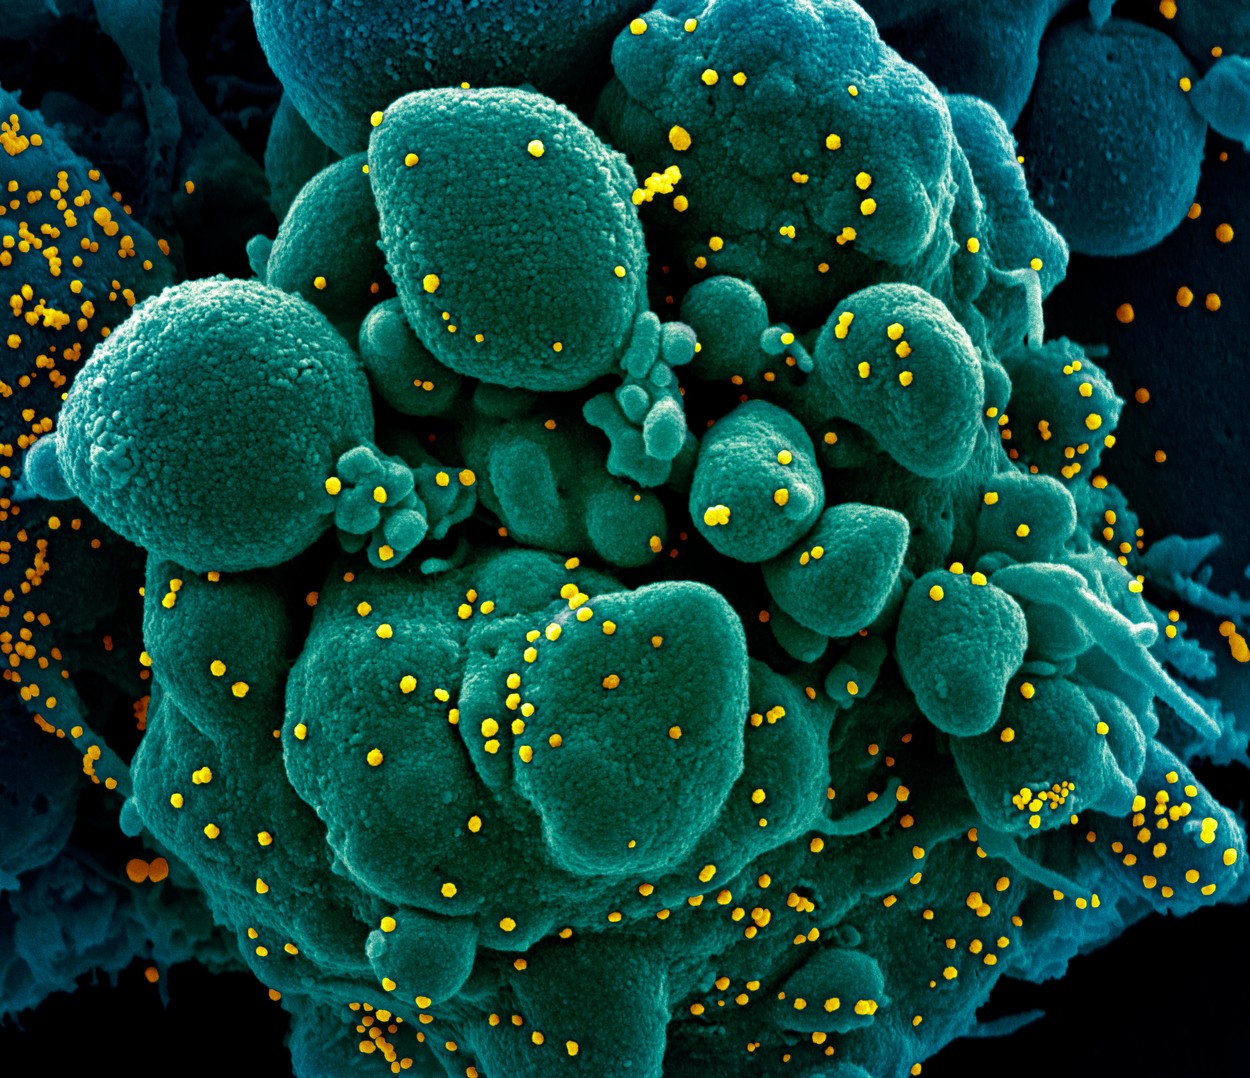 Cell infected with Covid-19 coronavirus particles. Coloured scanning electron micrograph (SEM) of SARS-CoV-2 coronavirus particles (yellow) on an apoptotic cell (green) from a patient sample. SARS-CoV-2 (previously 2019-nCoV) was first identified in Wuhan, China, in December 2019, and has been declared a pandemic. It is an enveloped RNA (ribonucleic acid) virus. It causes Covid-19, a respiratory infection that can lead to fatal pneumonia. As of March 2020, over 200,000 have been infected worldwide with thousands of deaths. Social restrictions and infection control measures have been put in place to slow the spread of the virus. This sample was imaged at the NIAID (National Institute of Allergy and Infectious Diseases) Integrated Research Facility (IRF) in Fort Detrick, Maryland, USA., Image: 513606872, License: Rights-managed, Restrictions: , Model Release: no, Credit line: Science Photo Library / Sciencephoto / Profimedia